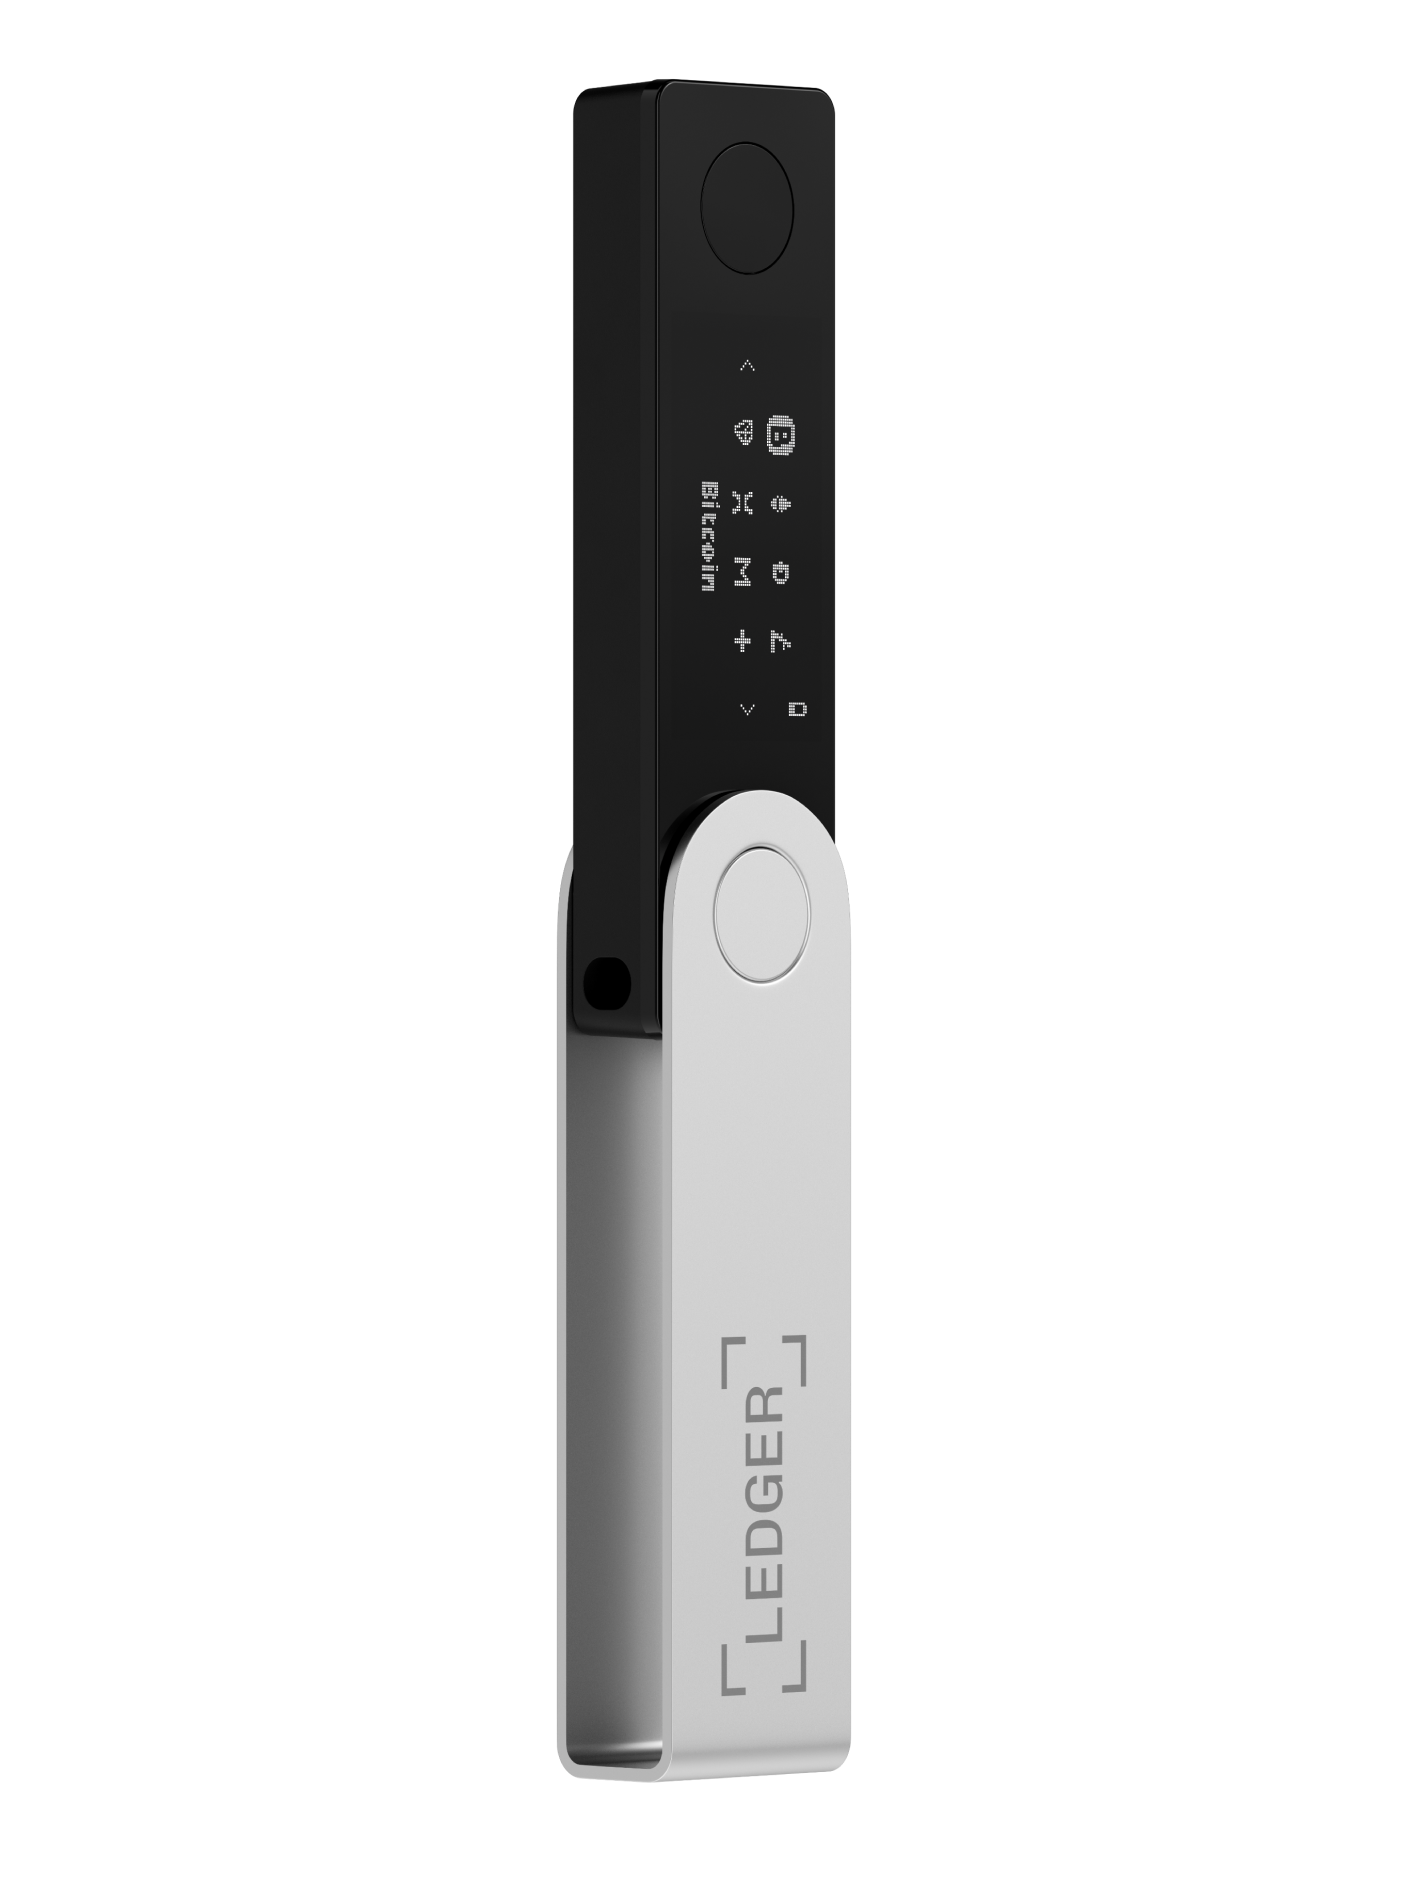 Buy a Ledger on Amazon: How to Know It's Safe | Ledger